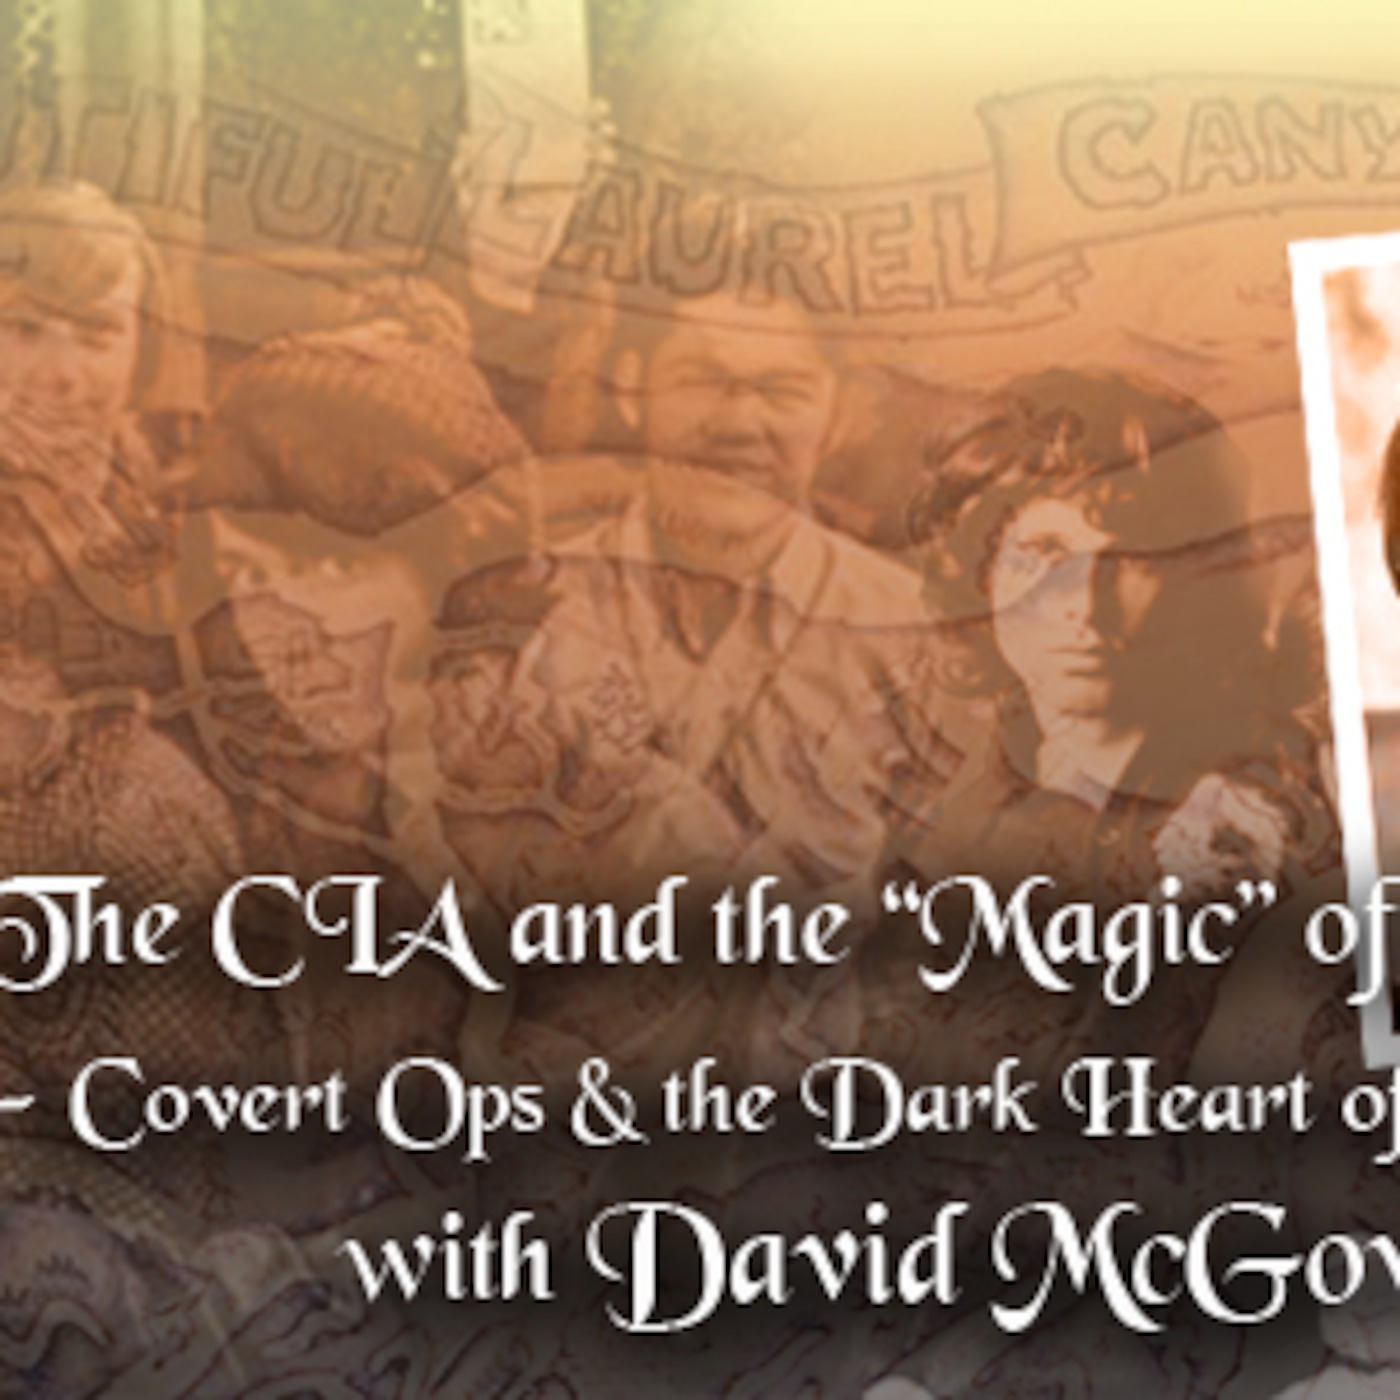 An Interview with Dave McGowan – “The CIA and the “Magic” of Laurel Canyon - Covert Ops & the Dark Heart of the Hippie Dream” – #186